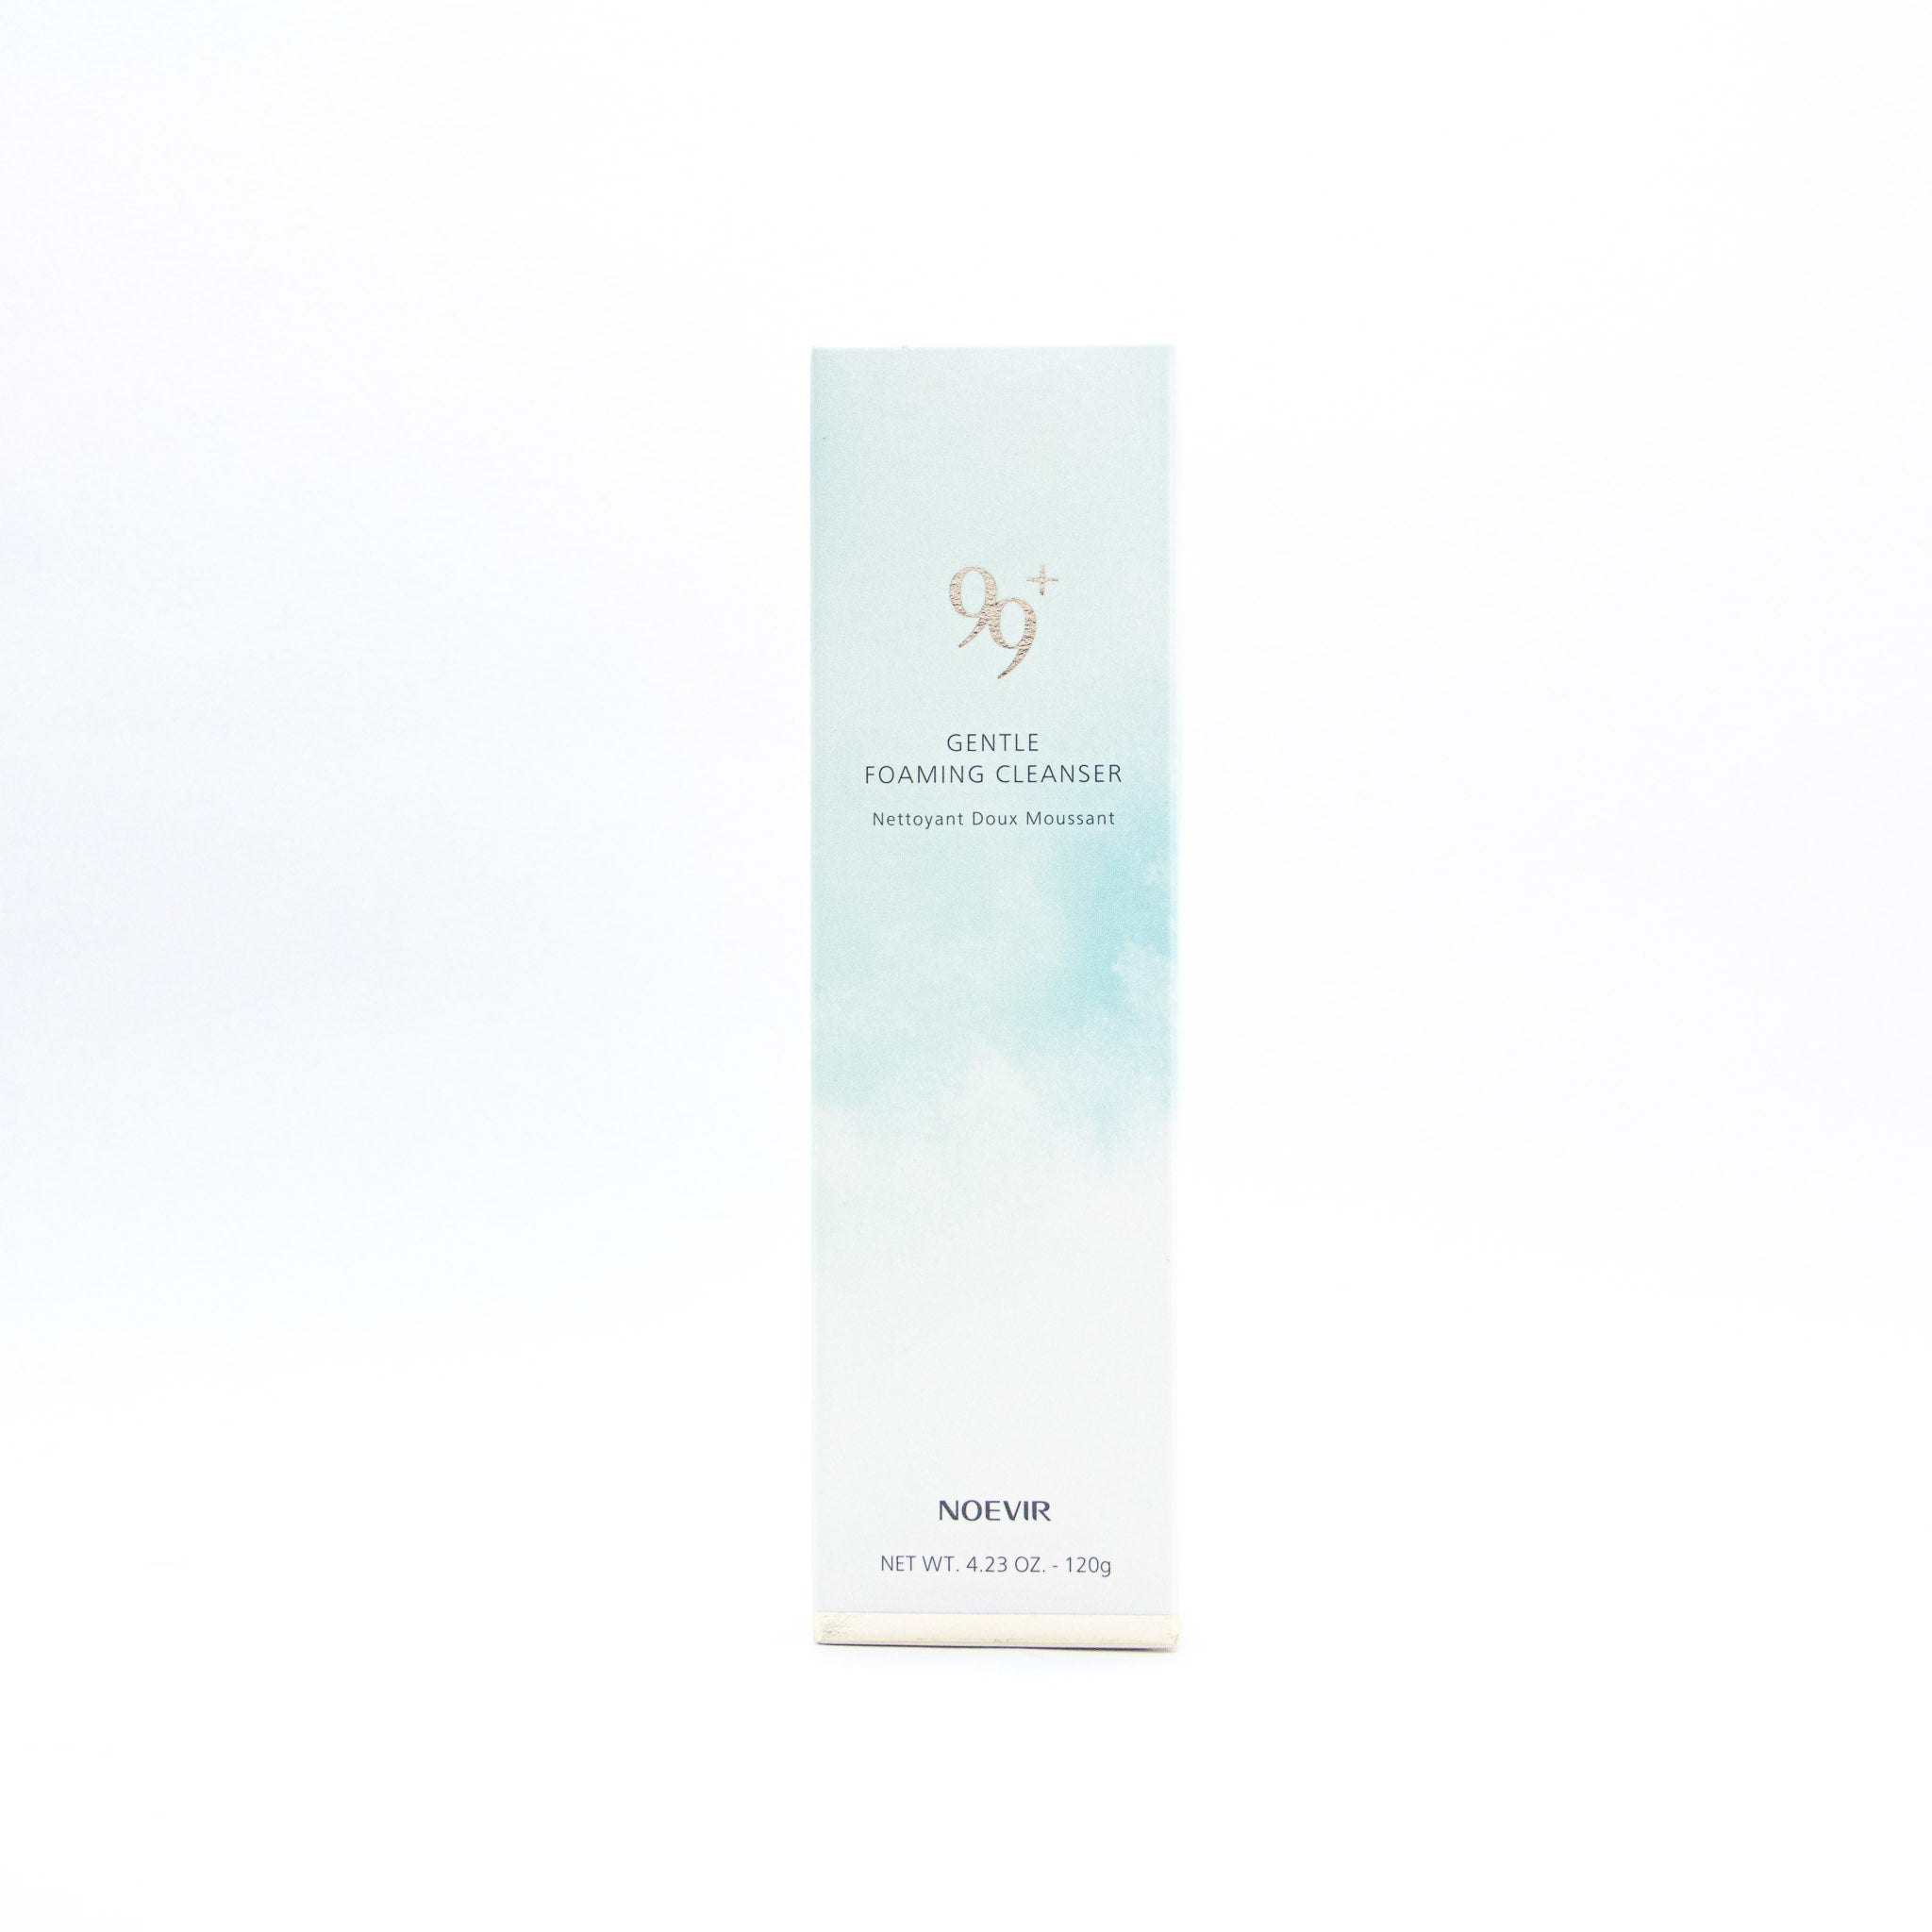 Noevir 99+ Gentle Foaming Cleanser, 4.23 oz:   Thoroughly and gently cleanses skin without stripping it of its essential moisture. The luxurious foam provides even the most sensitive skin a refreshing cleansing experience and leaves it feeling clean and soft; not dry.